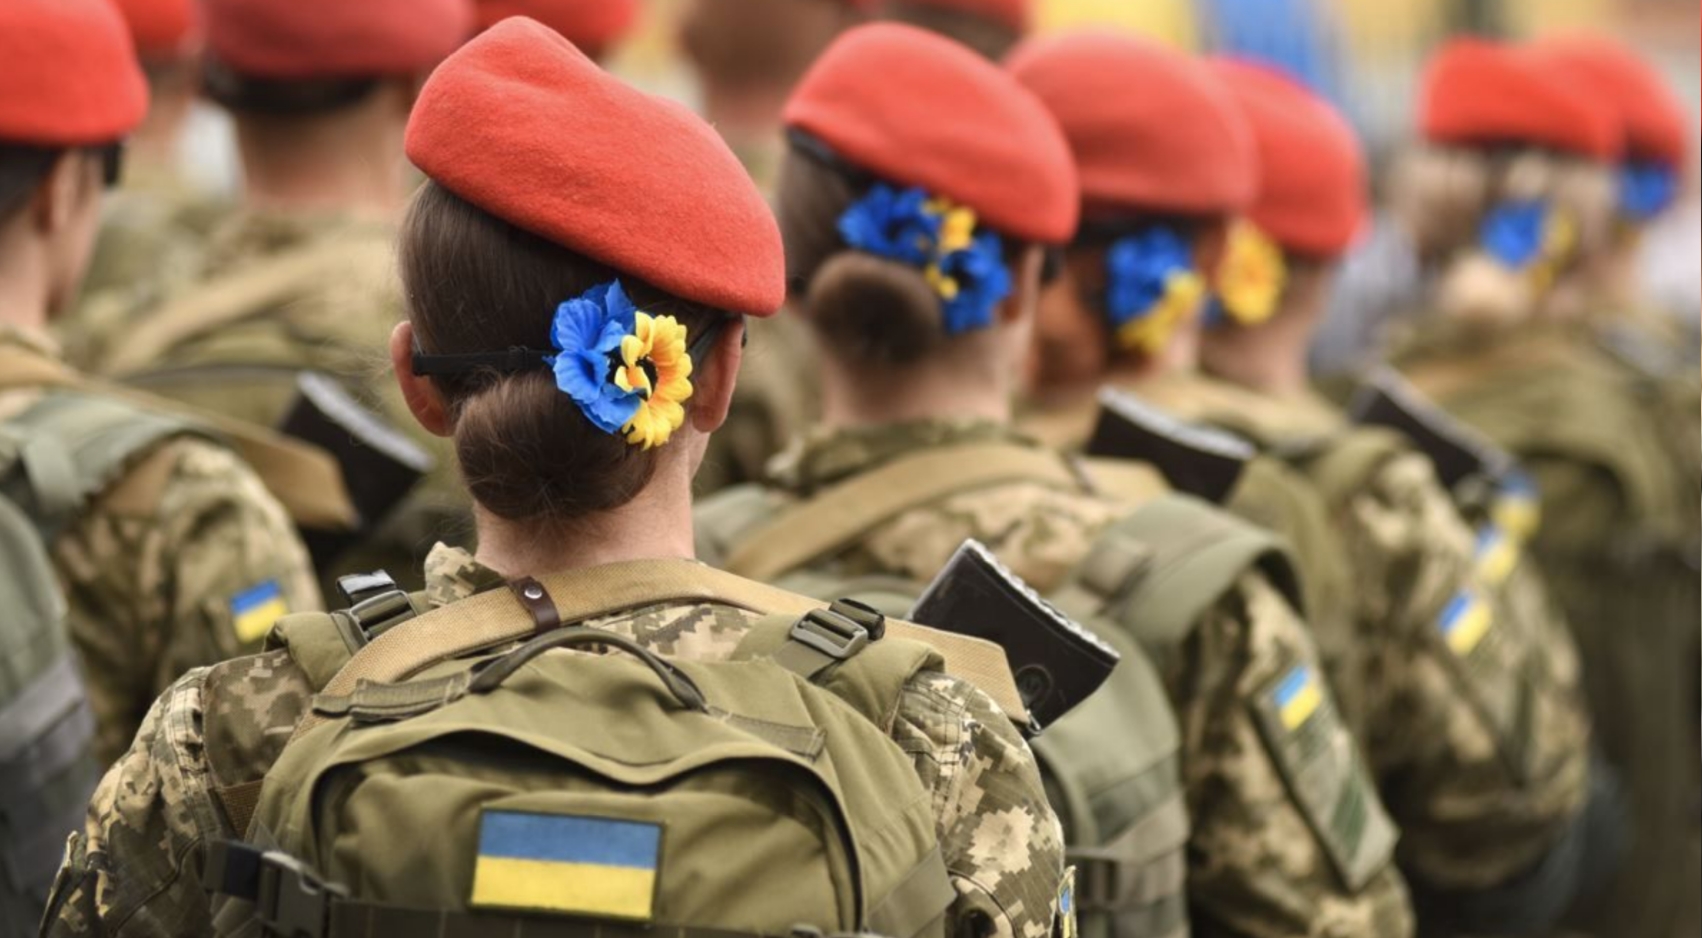 Ukraine's Ministry of Foreign Affairs noted on Twitter that more than 15% of the regular Ukrainian army are women.